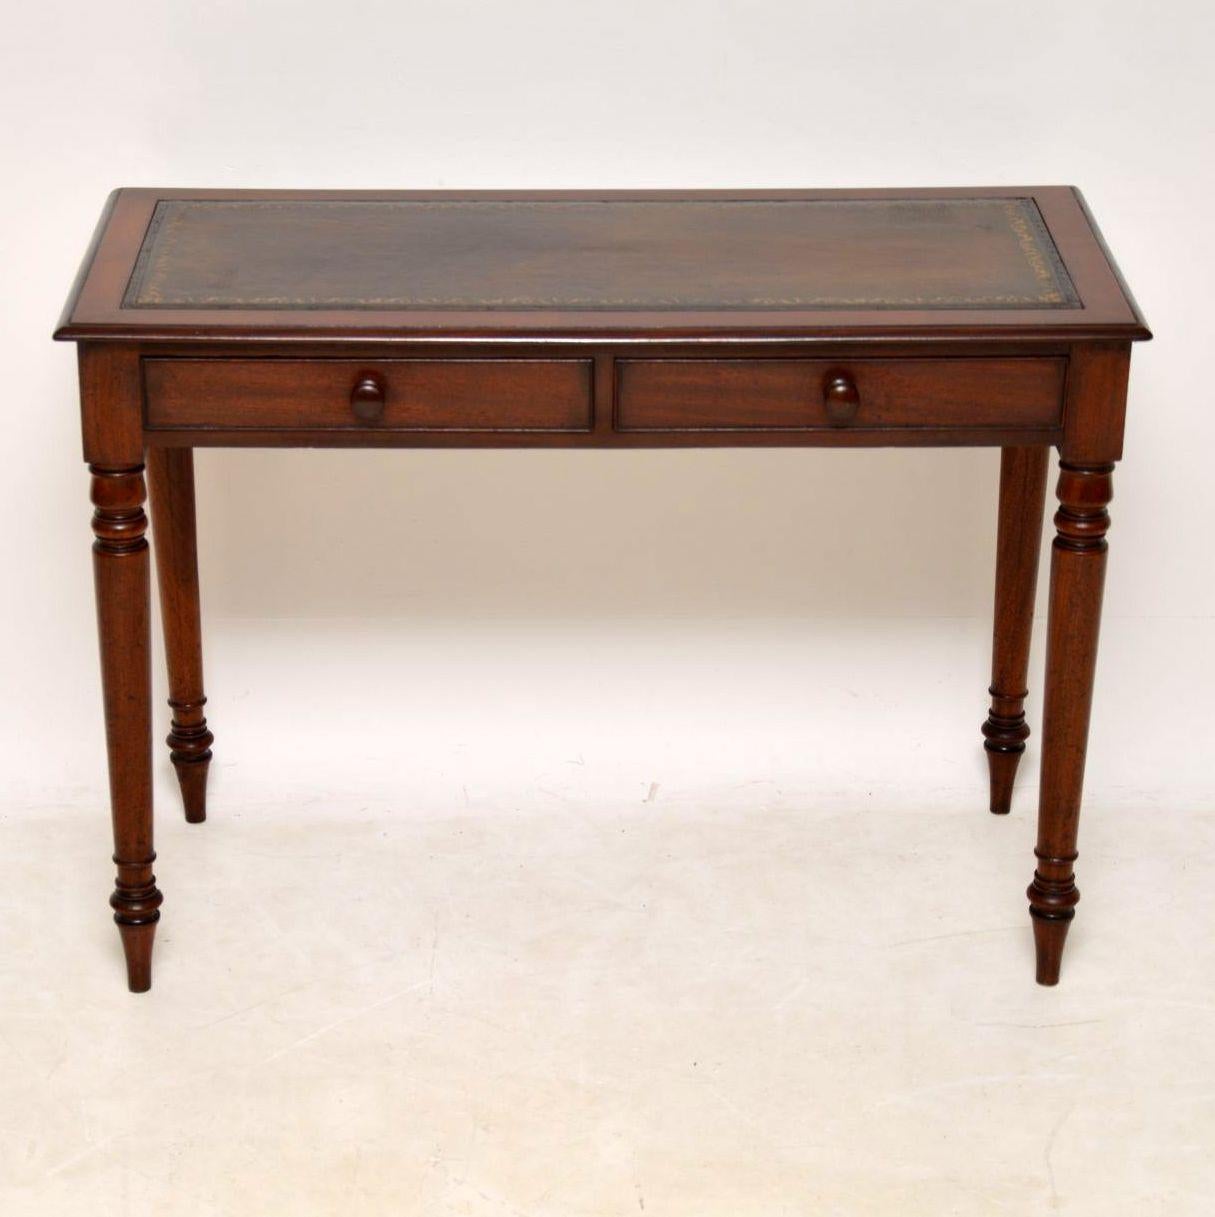 Antique Victorian mahogany writing table in excellent condition, with a tooled leather writing surface. It has two drawers with fine dovetails, mahogany handles and sits on turned legs. This desk has a good original color and is full of character. I